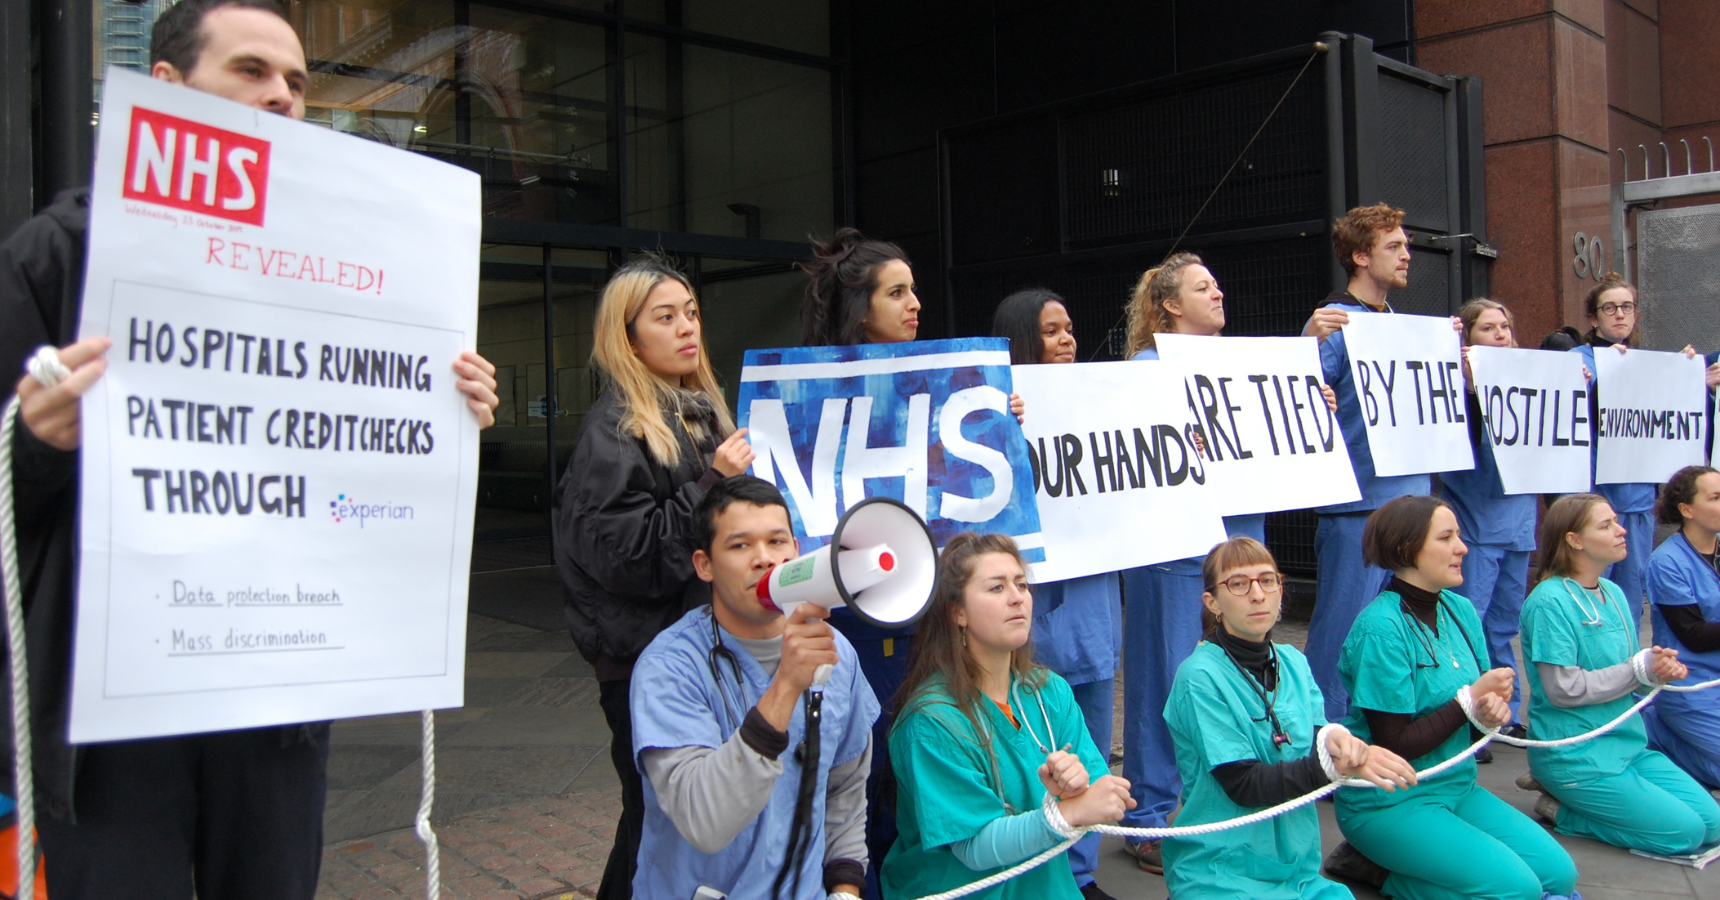 Protestors wearing scrubs in front of a hospital, kneeling with their hands tied together with one length of rope - protestors behind hold signs that together read 'NHS our hands are tied. One placard at the front is a mock newspaper headline reading 'Hospitals running patient credit checks through experian